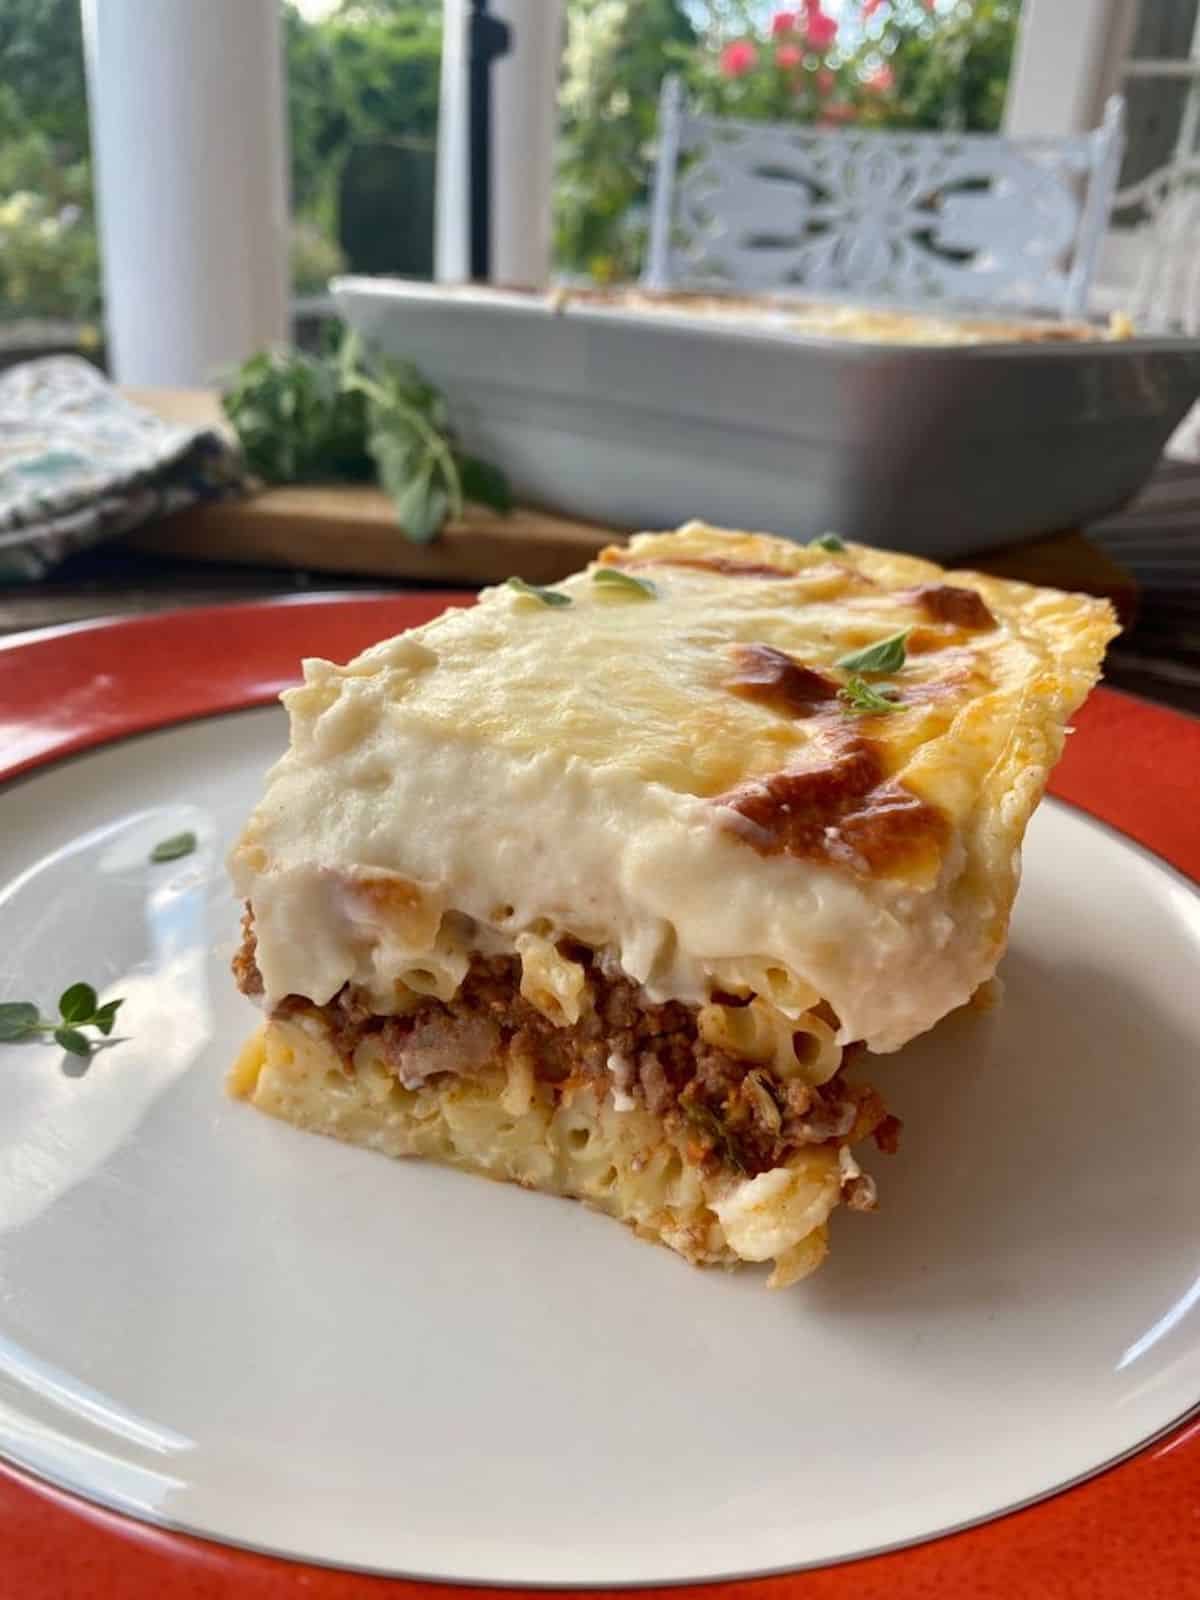 A slice of authentic Cypriot pastitsio